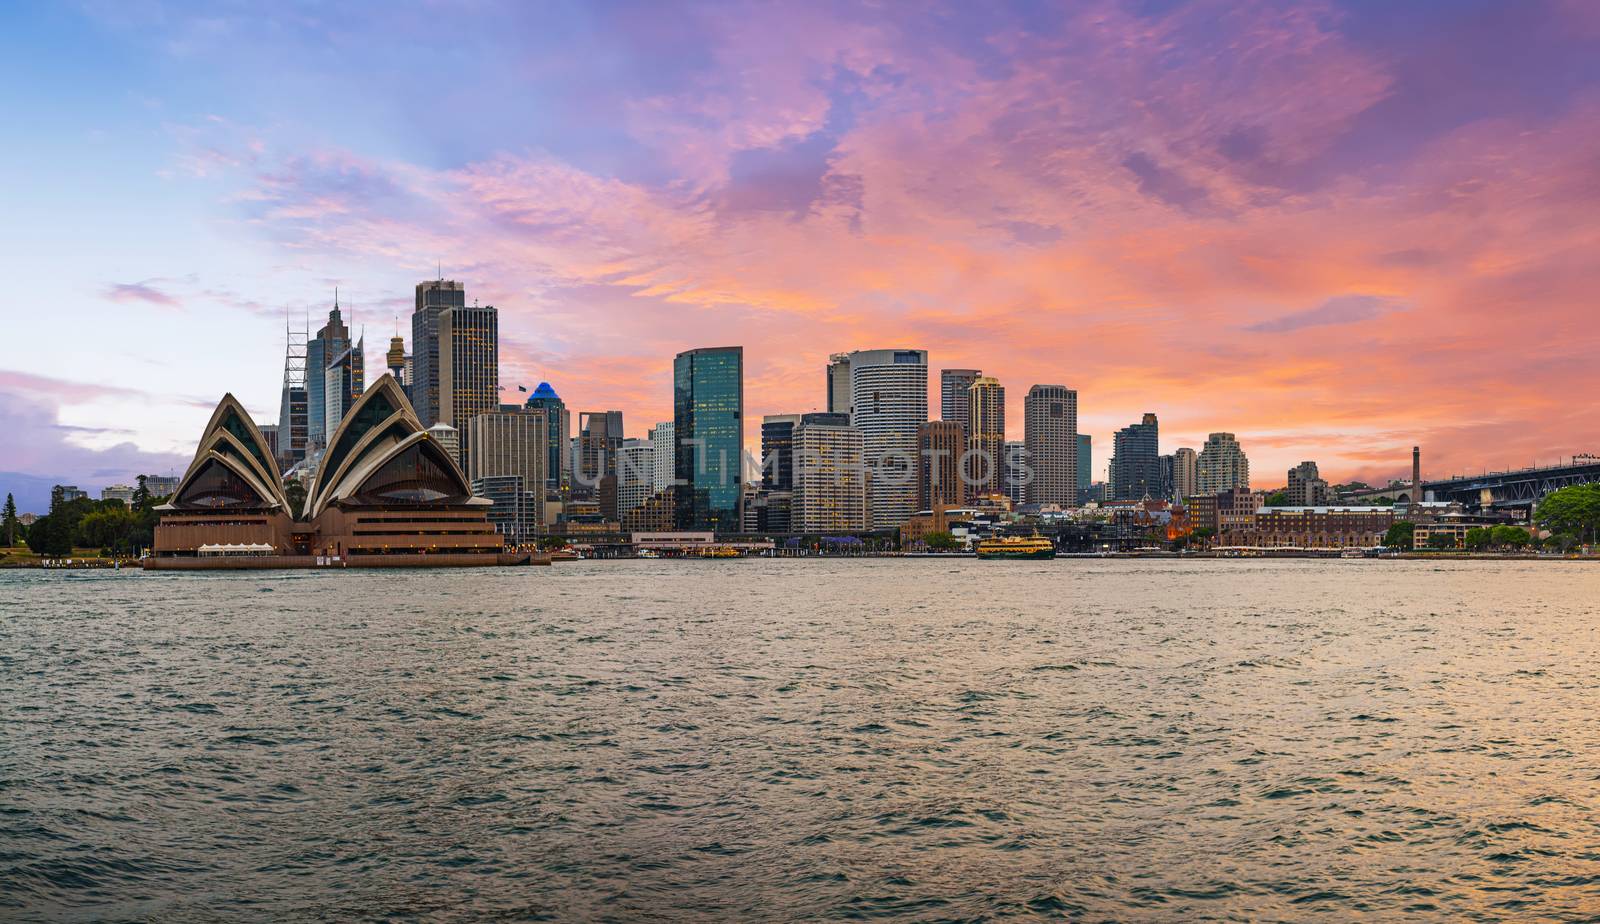 Dramatic sunset over Sydney in Australia by fyletto